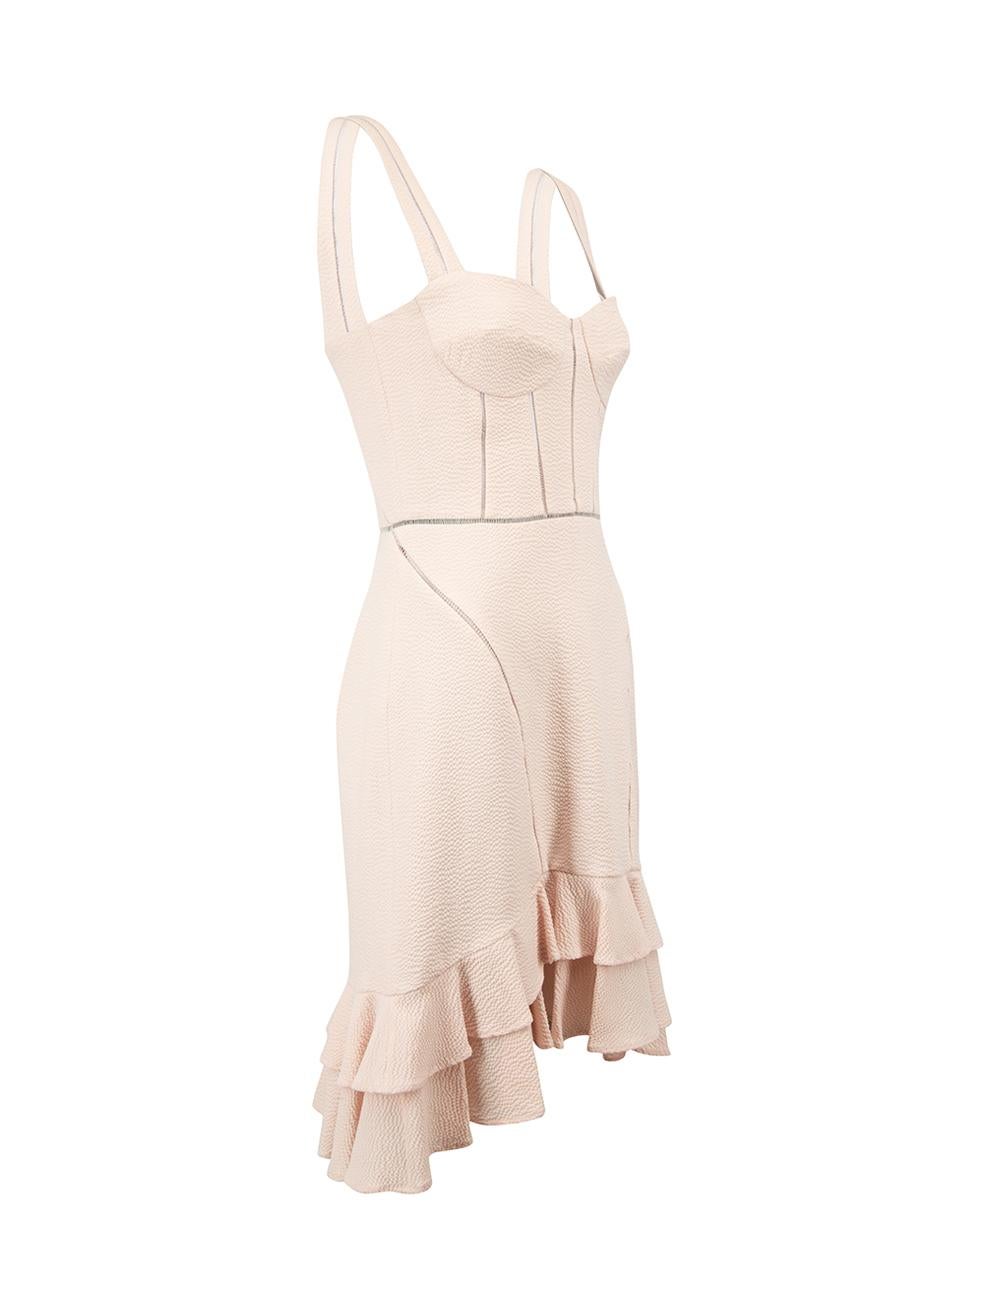 CONDITION is Very good. Hardly any visible wear to dress is evident on this used Jonathan Simkhai designer resale item.



Details


Pink

Wool viscose

Sleeveless bustier dress

Knee length

Textured fabric

Ruffled hem

Zip fastening on the